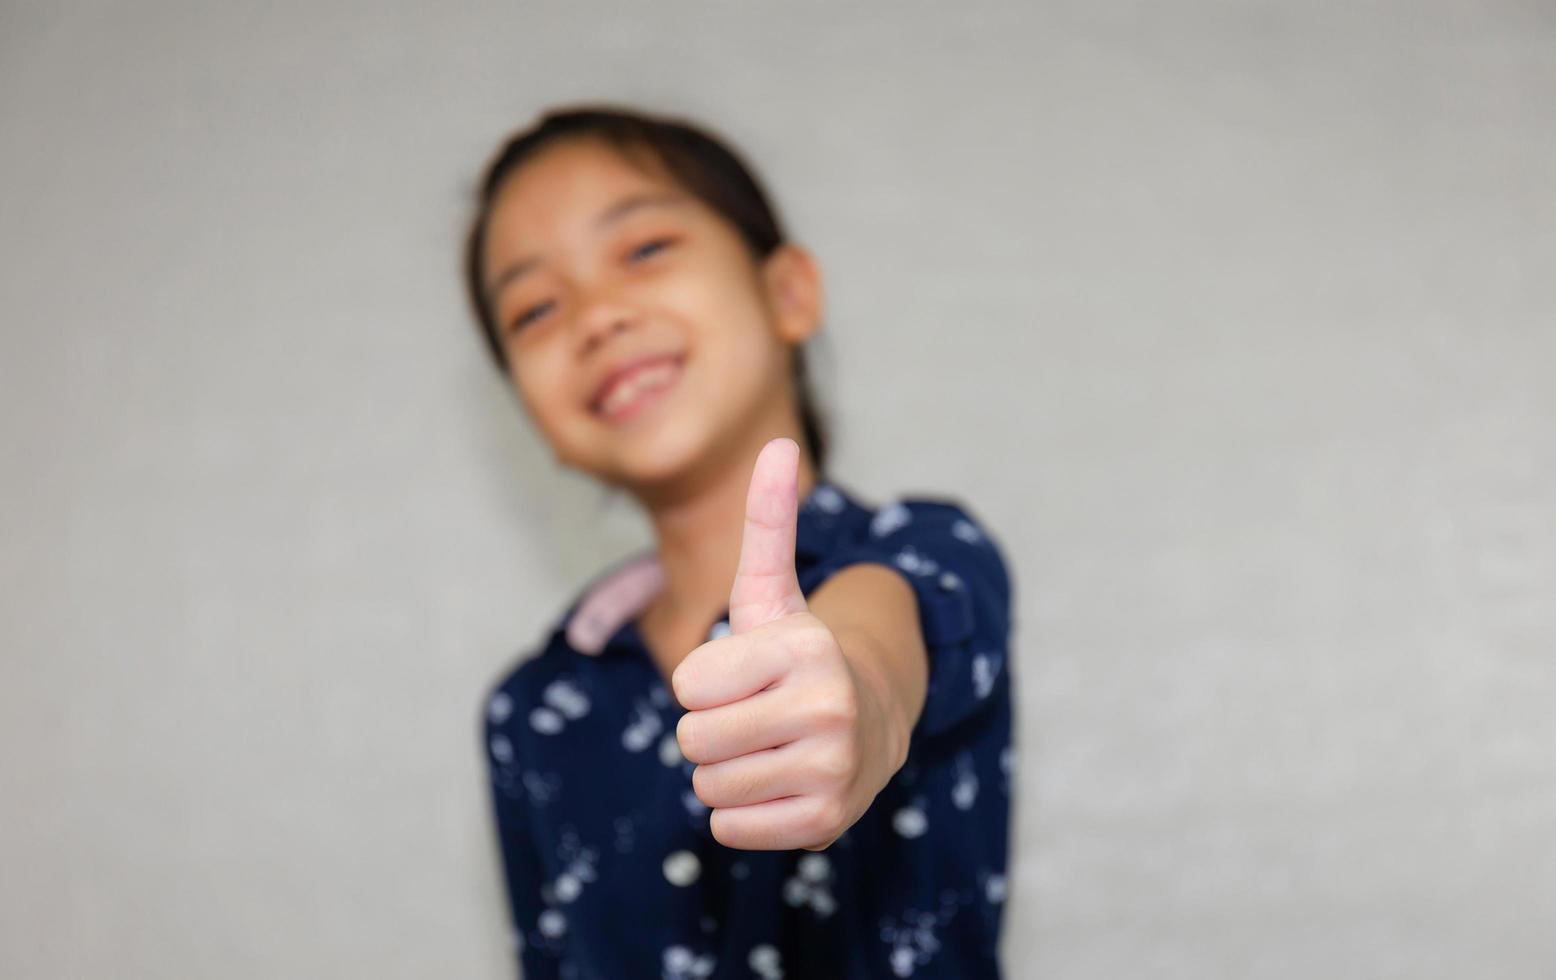 Cheerful little girl showing thumps up with blurred background photo